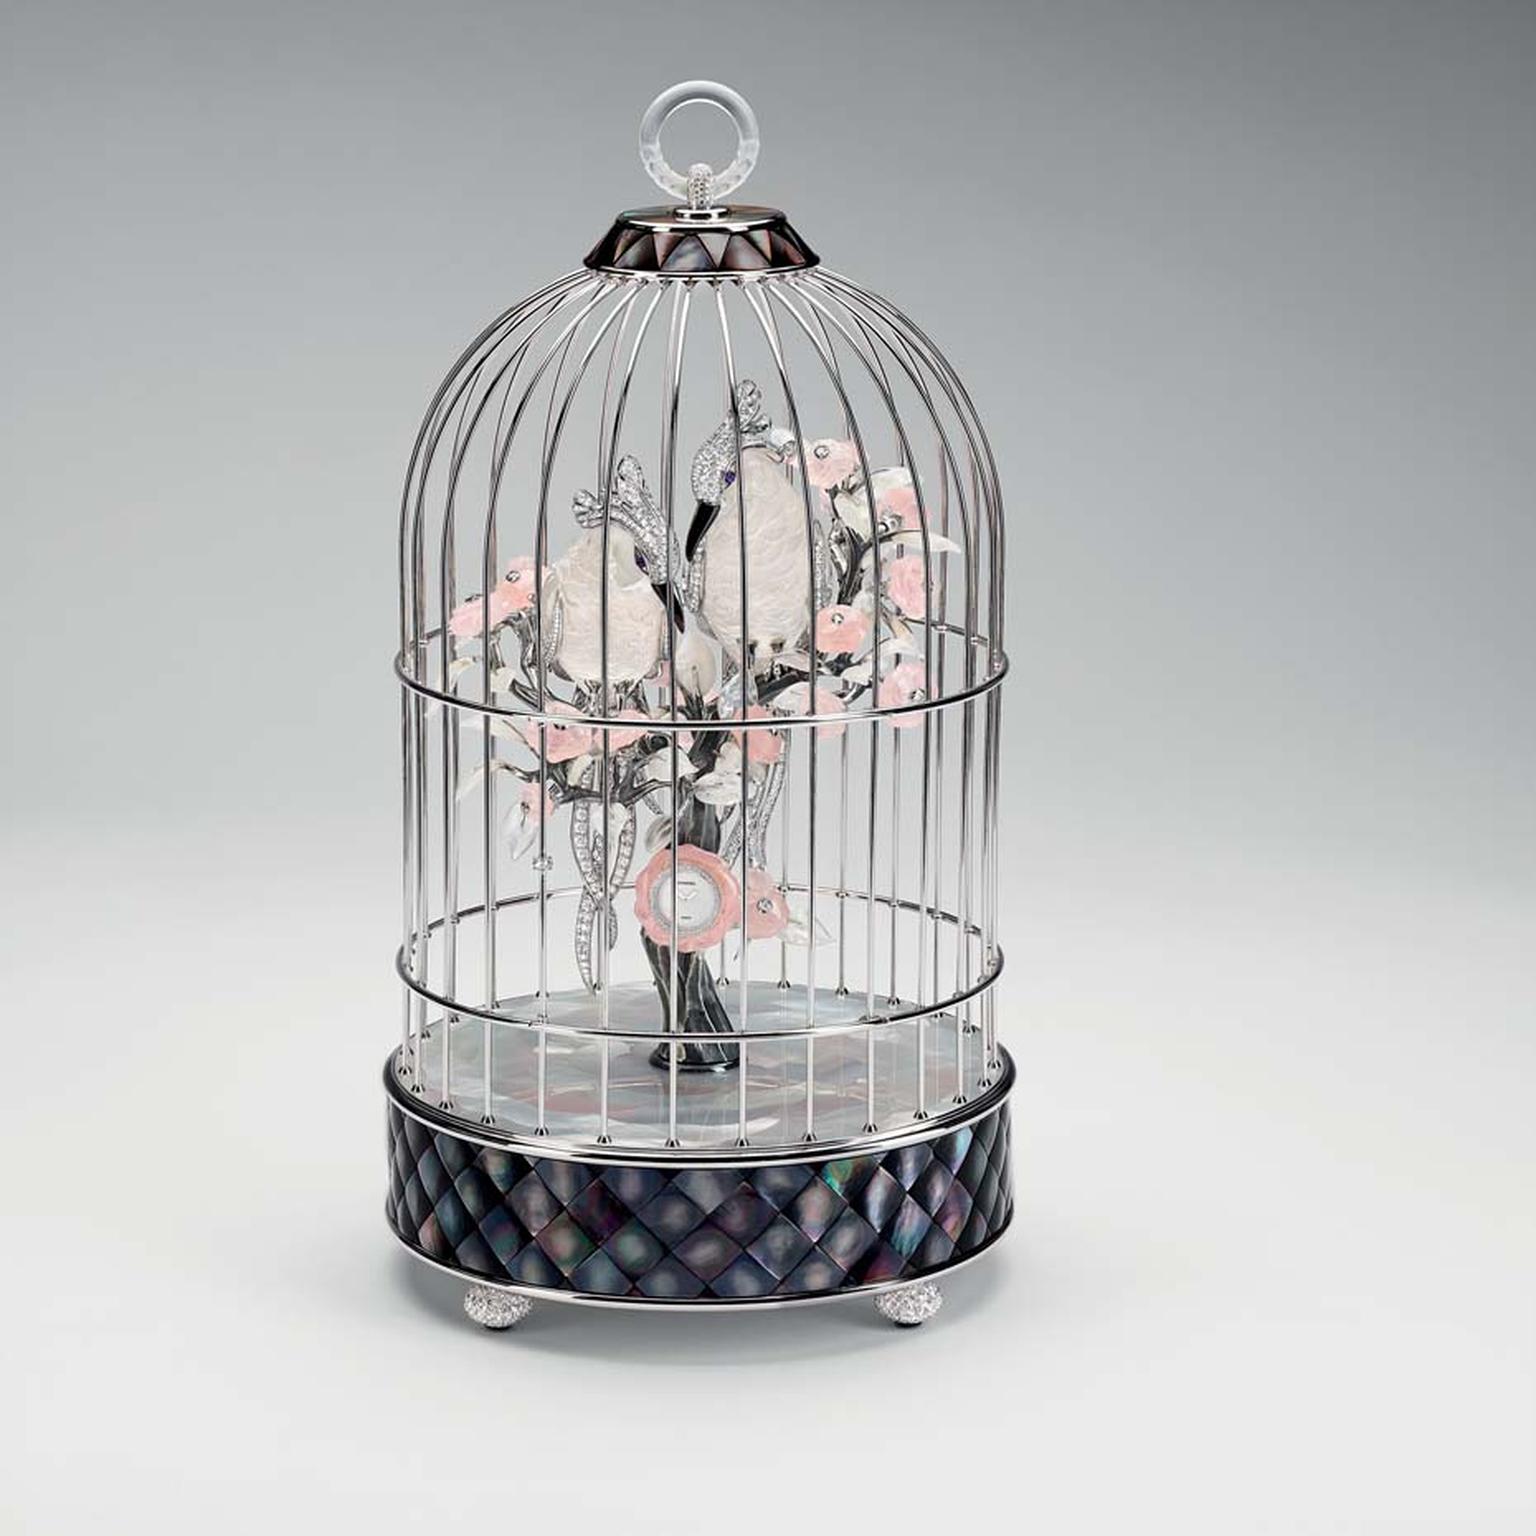 Chanel’s Birdcage combines expertise in watchmaking and jewellery featuring a cockatoo sculpture made with mother-of-pearl marquetry and stone-setting.